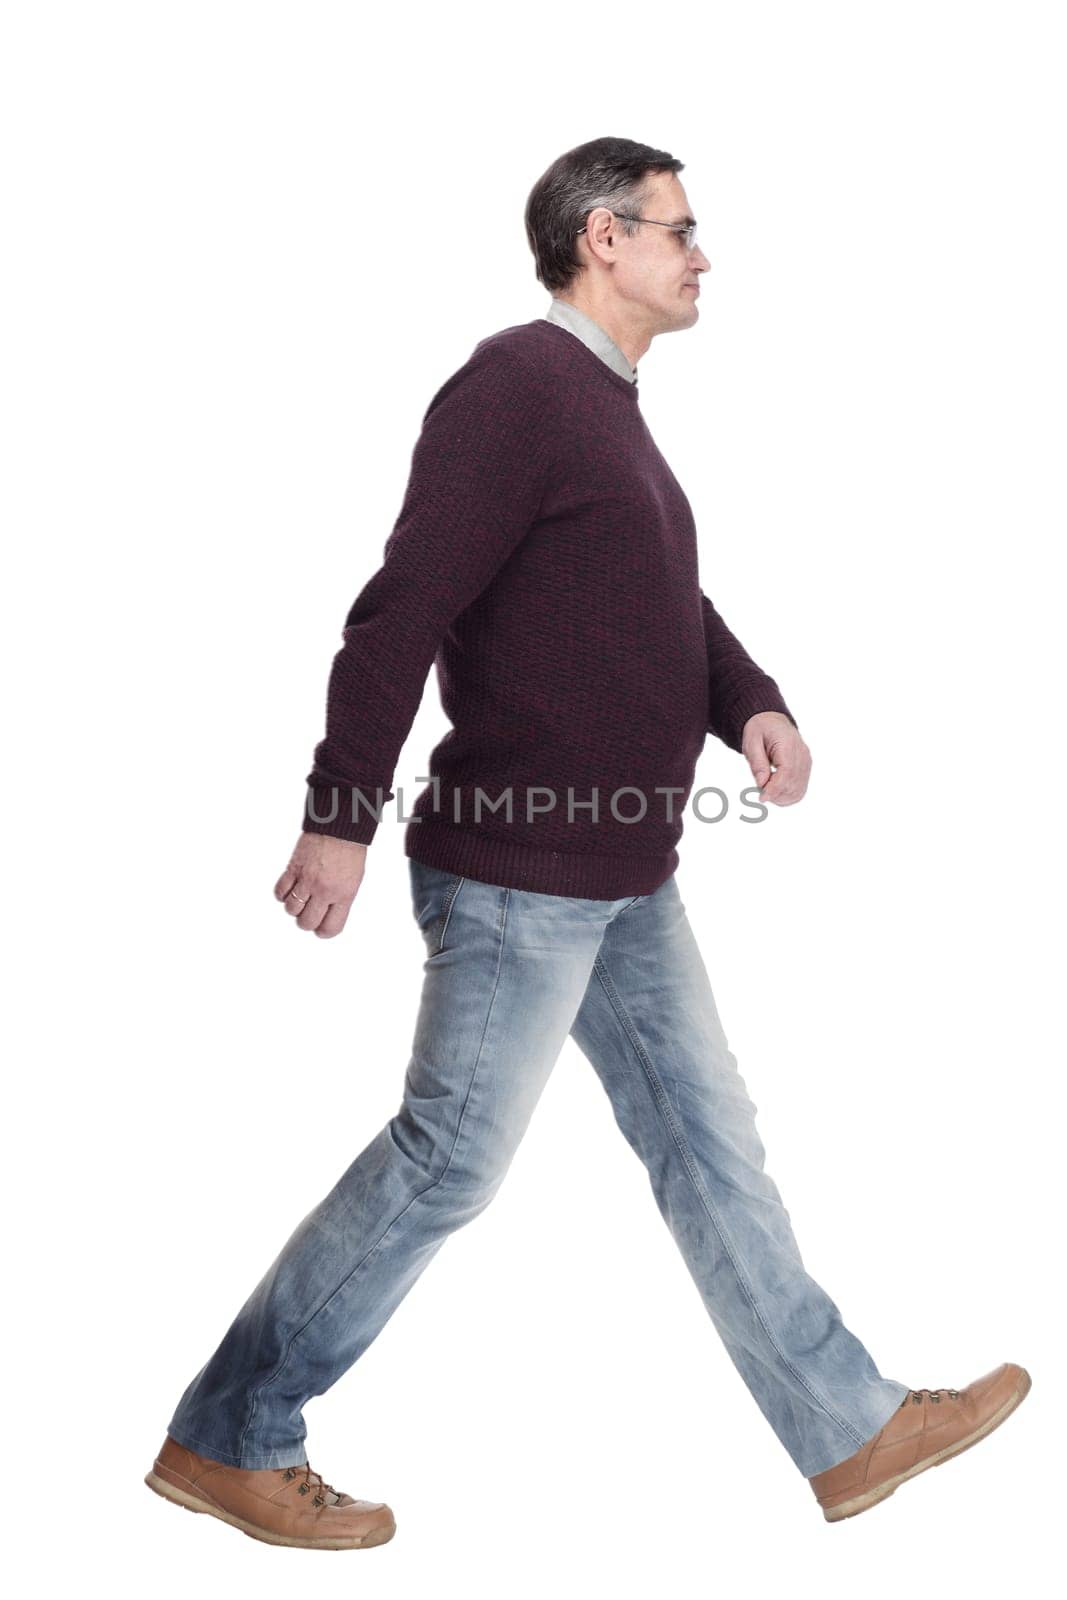 casual man in jeans and jumper striding forward by asdf